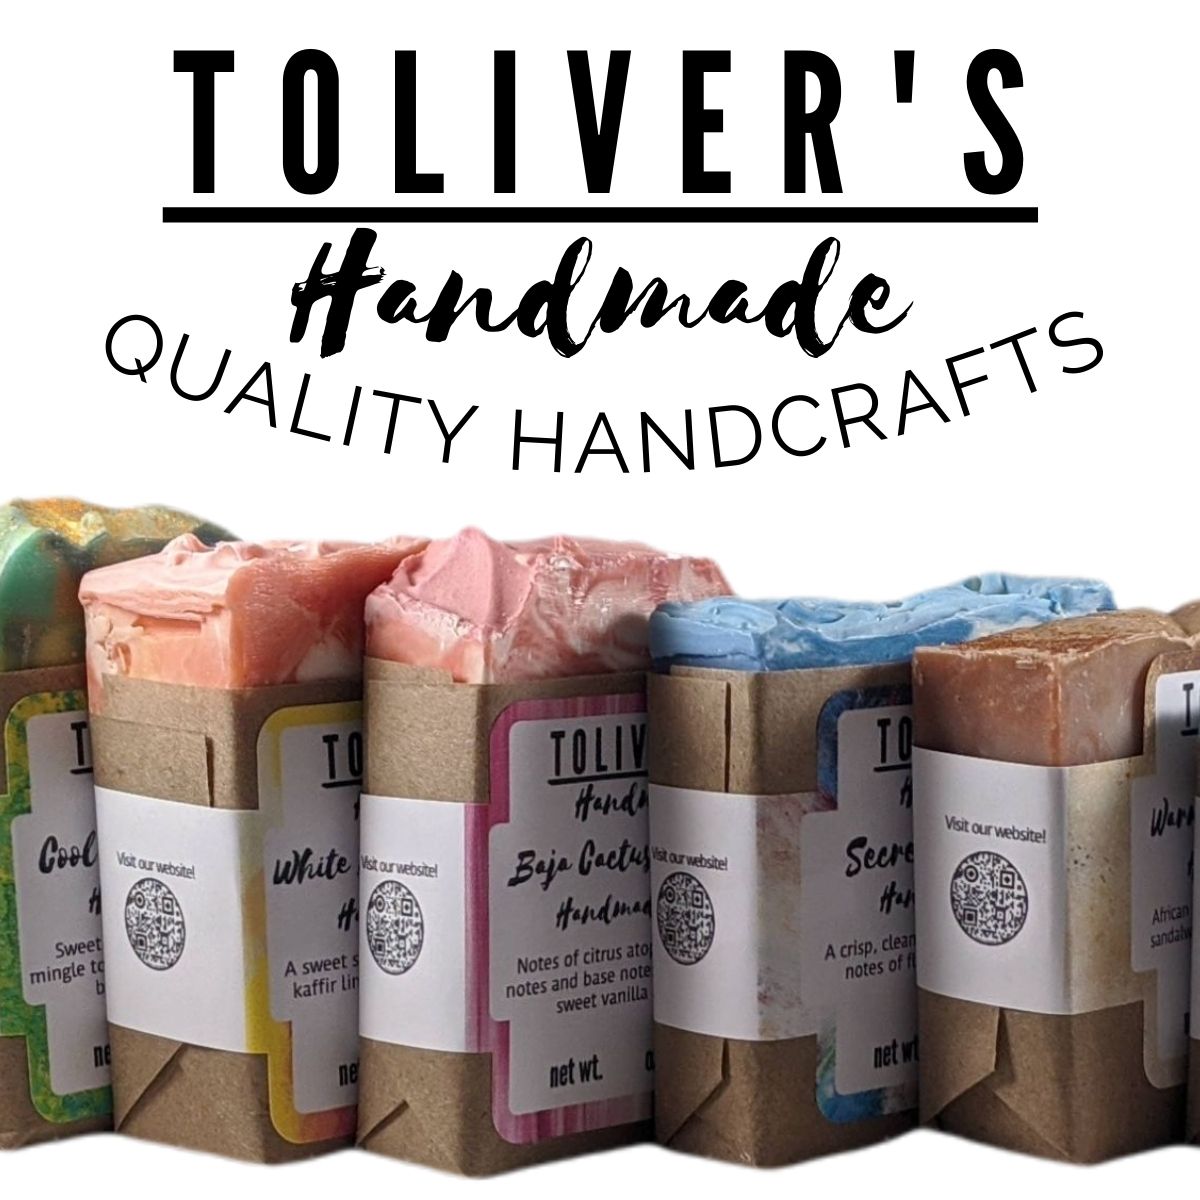 The logo or business face of "Toliver's Handmade"